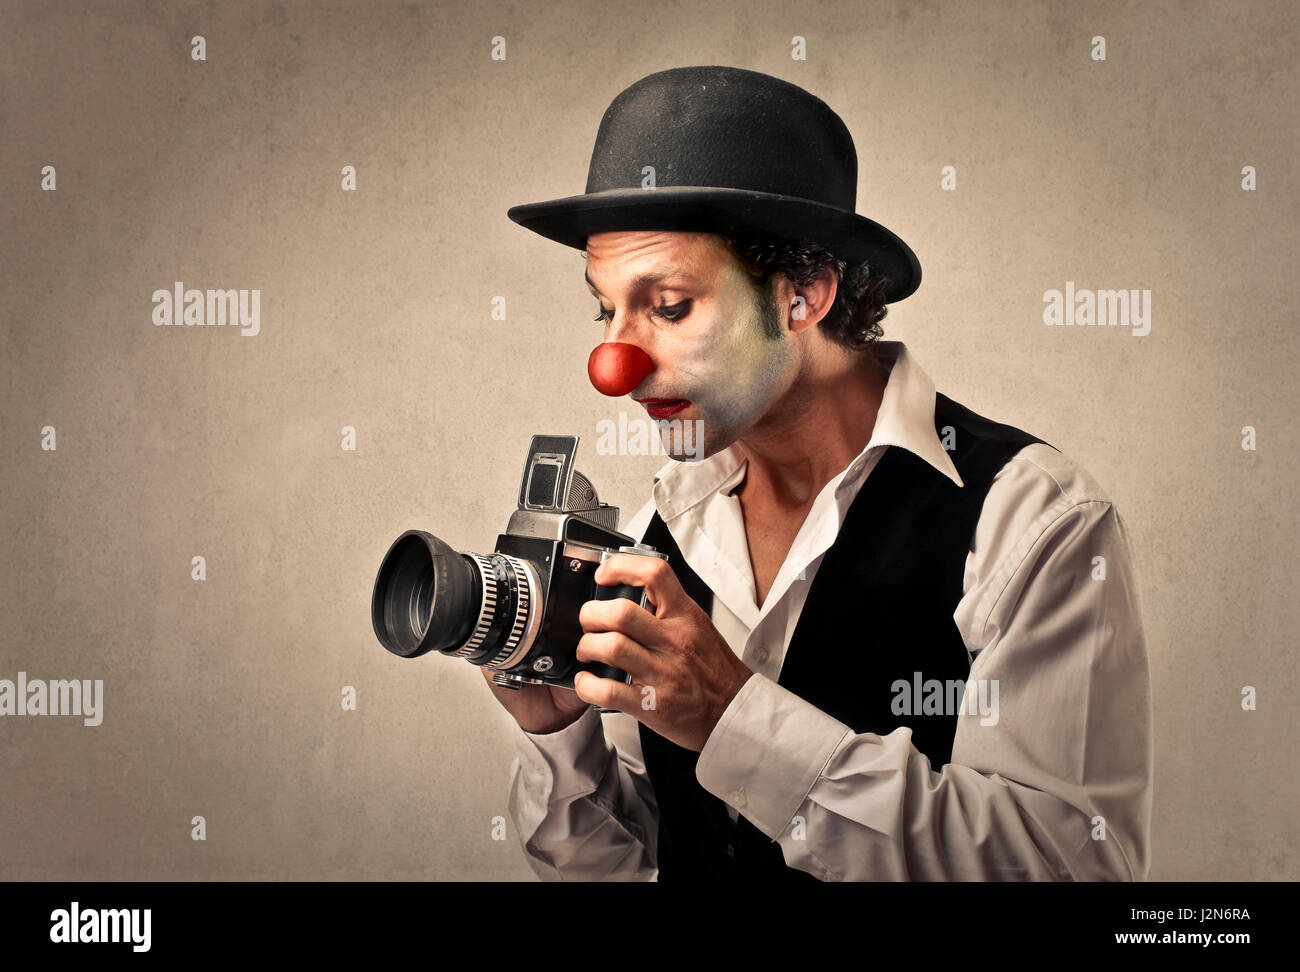 Clown man with professional camera Stock Photo